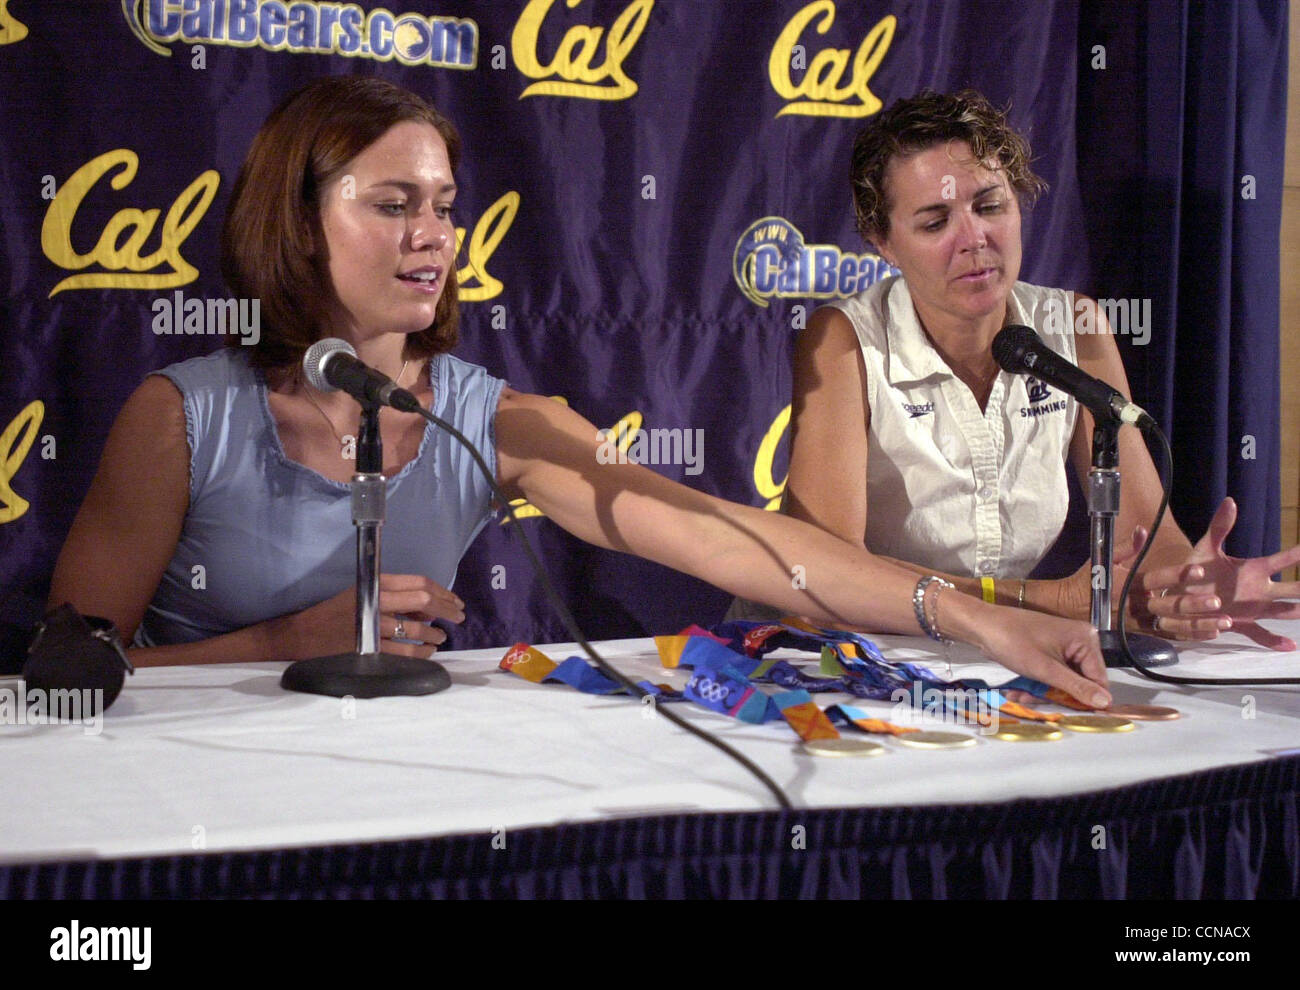 Bay Area Olympic hero Natalie Coughlin (cq) displays her 5 Olympic medals she won at the 2004 Summer Olympics held in Athens, Greece during a press conference held on the campus of U.C. Berkeley in Berkeley, Calif. on Wednesday, September 1, 2004. Coughlin, from Concord, Calif., won 2 gold medals, 2 Stock Photo